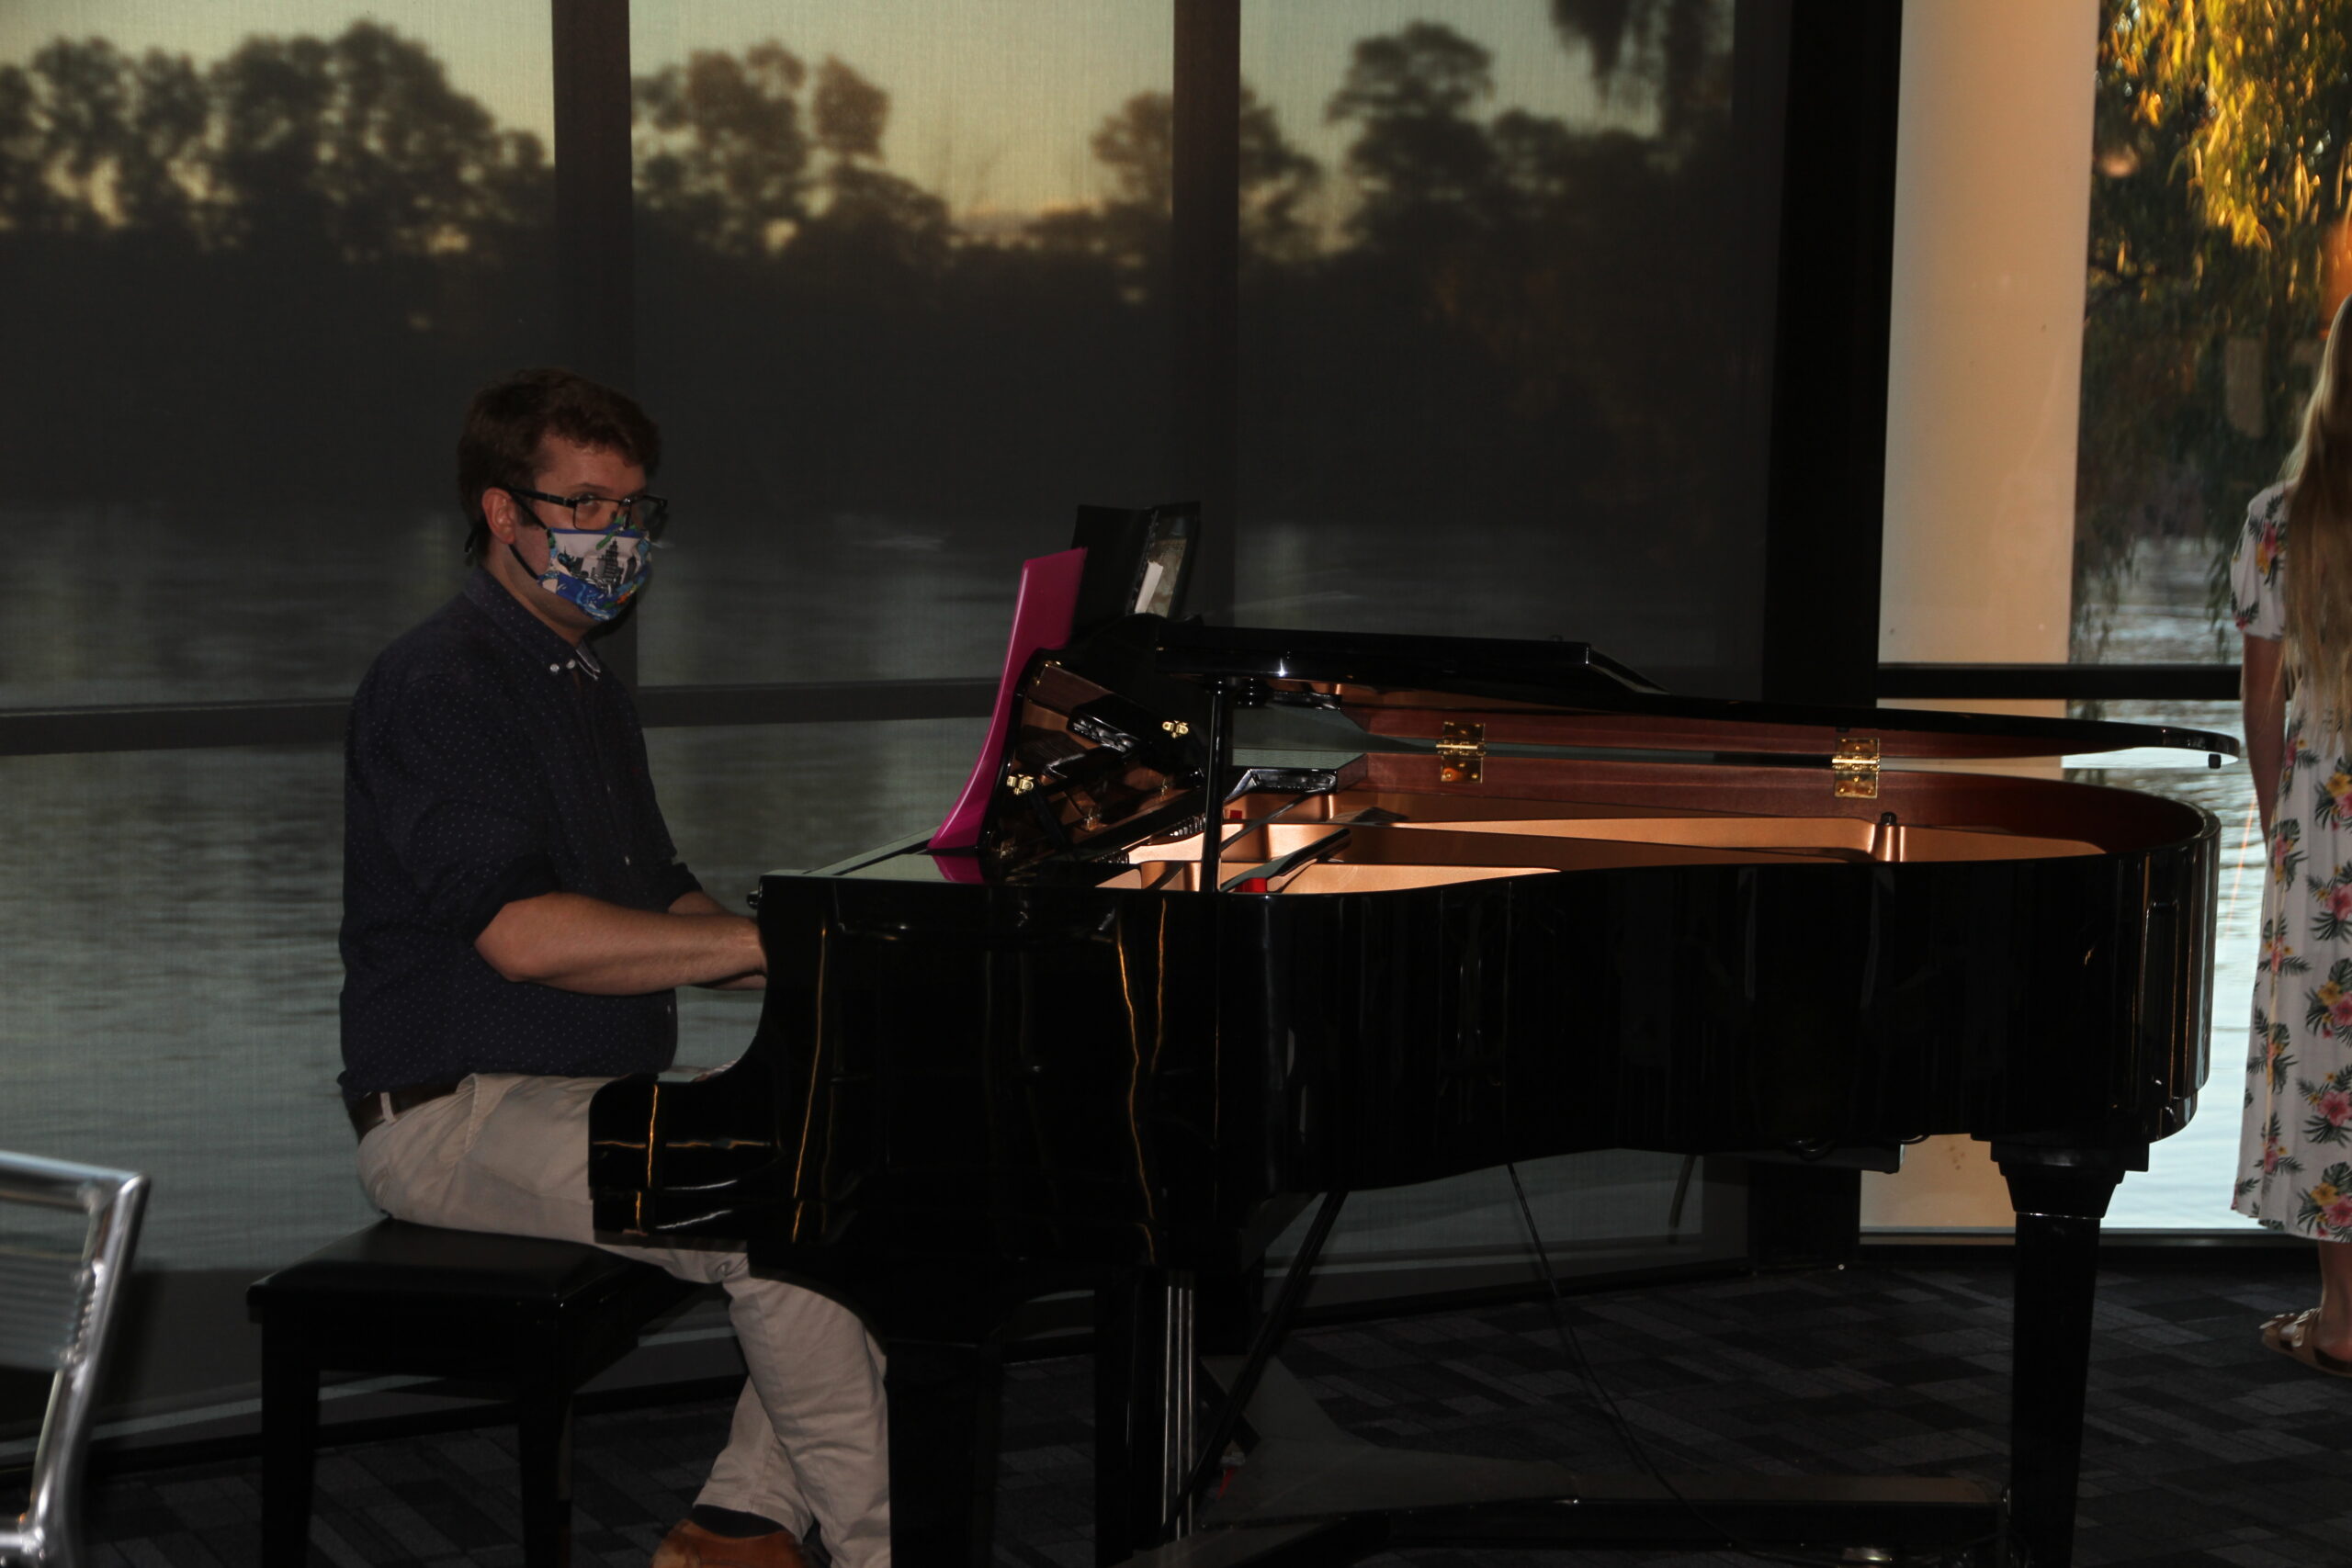 Stephen Bailey performs on the piano at the exhibition opening.